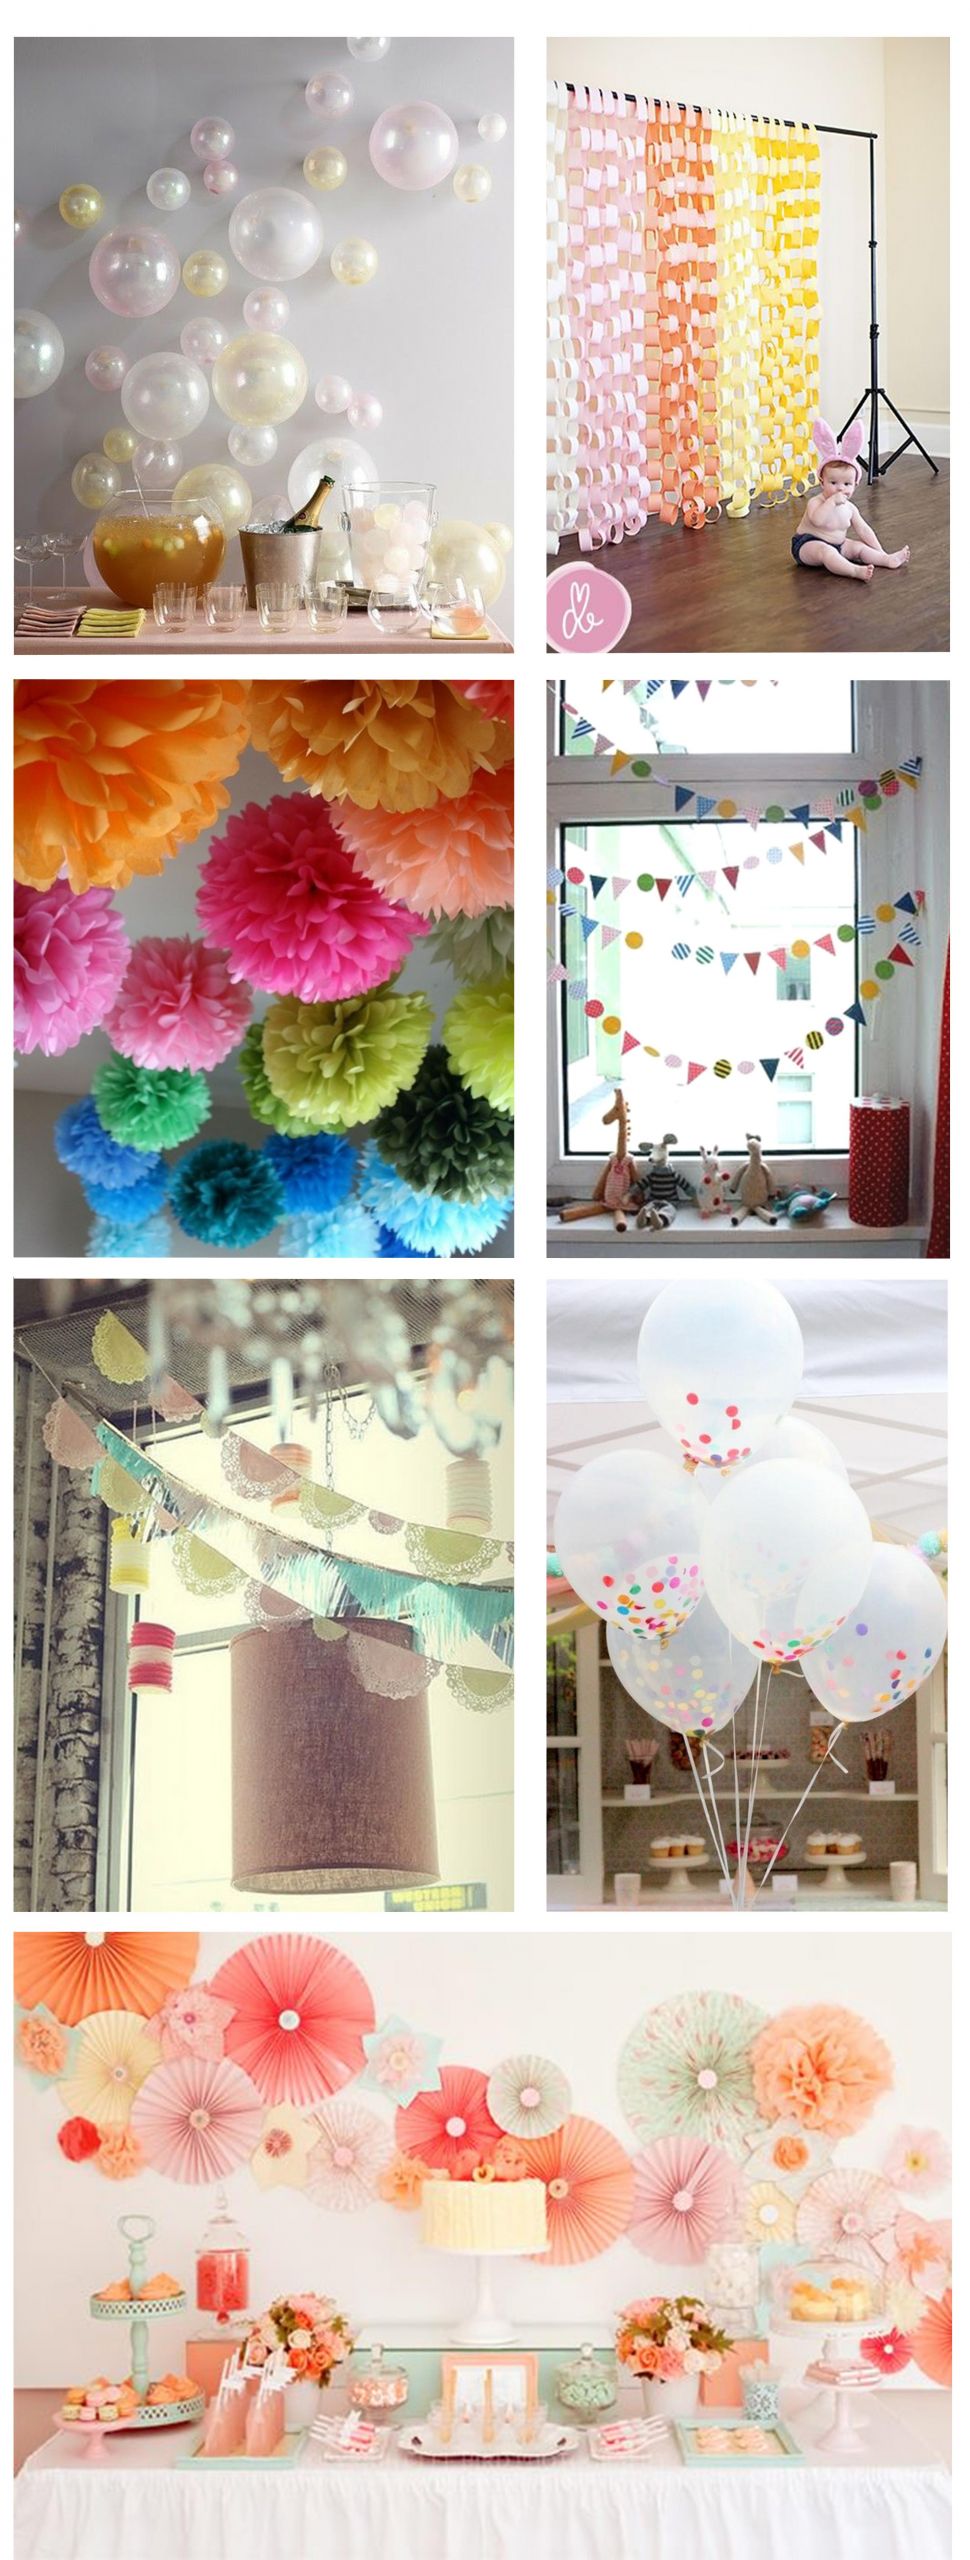 DIY Party Decor
 Ideas for home made party decorations